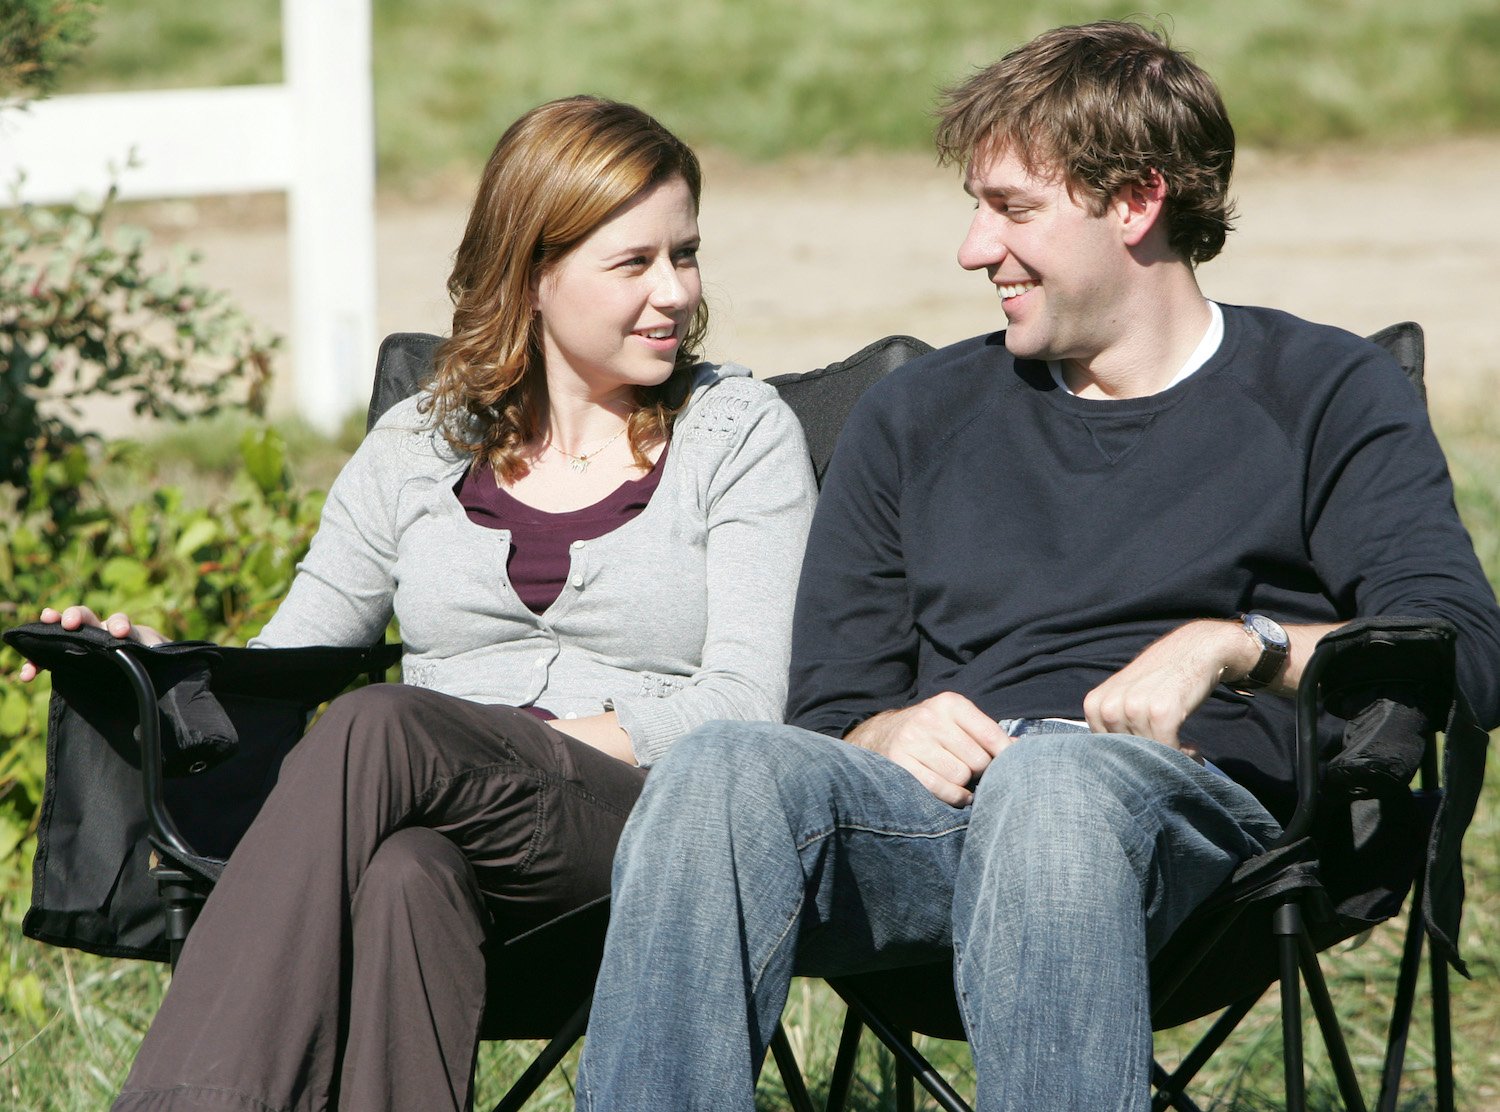 'The Office' characters Jim and Pam, played by Jenna Fischer and John Krasinsk,i sit in chairs and smile at each other.